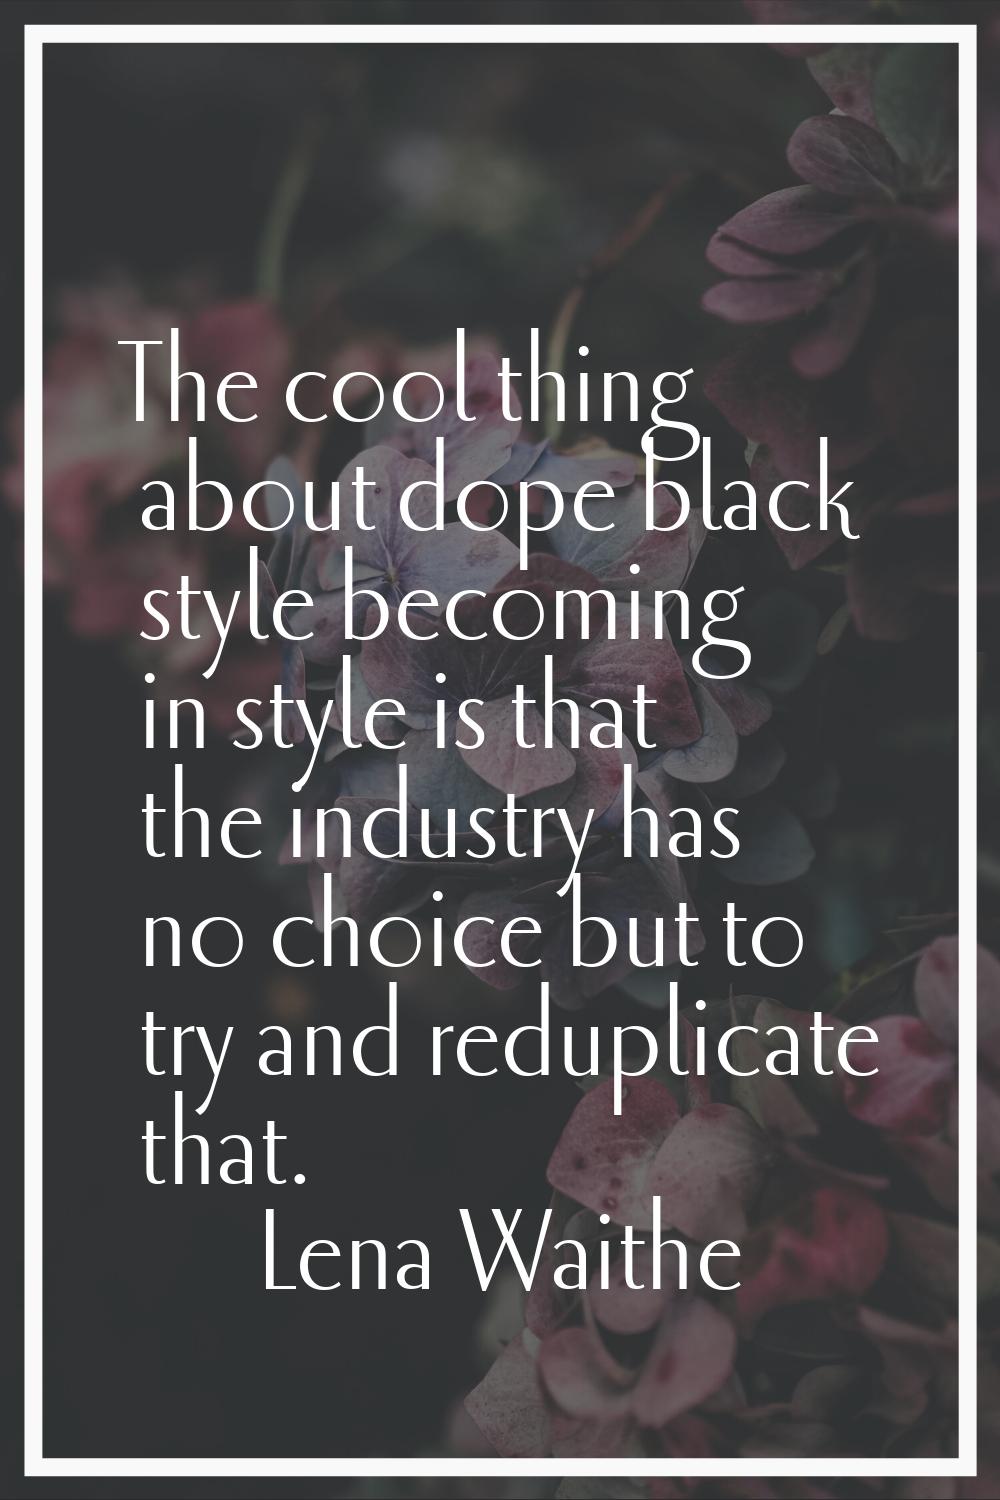 The cool thing about dope black style becoming in style is that the industry has no choice but to t